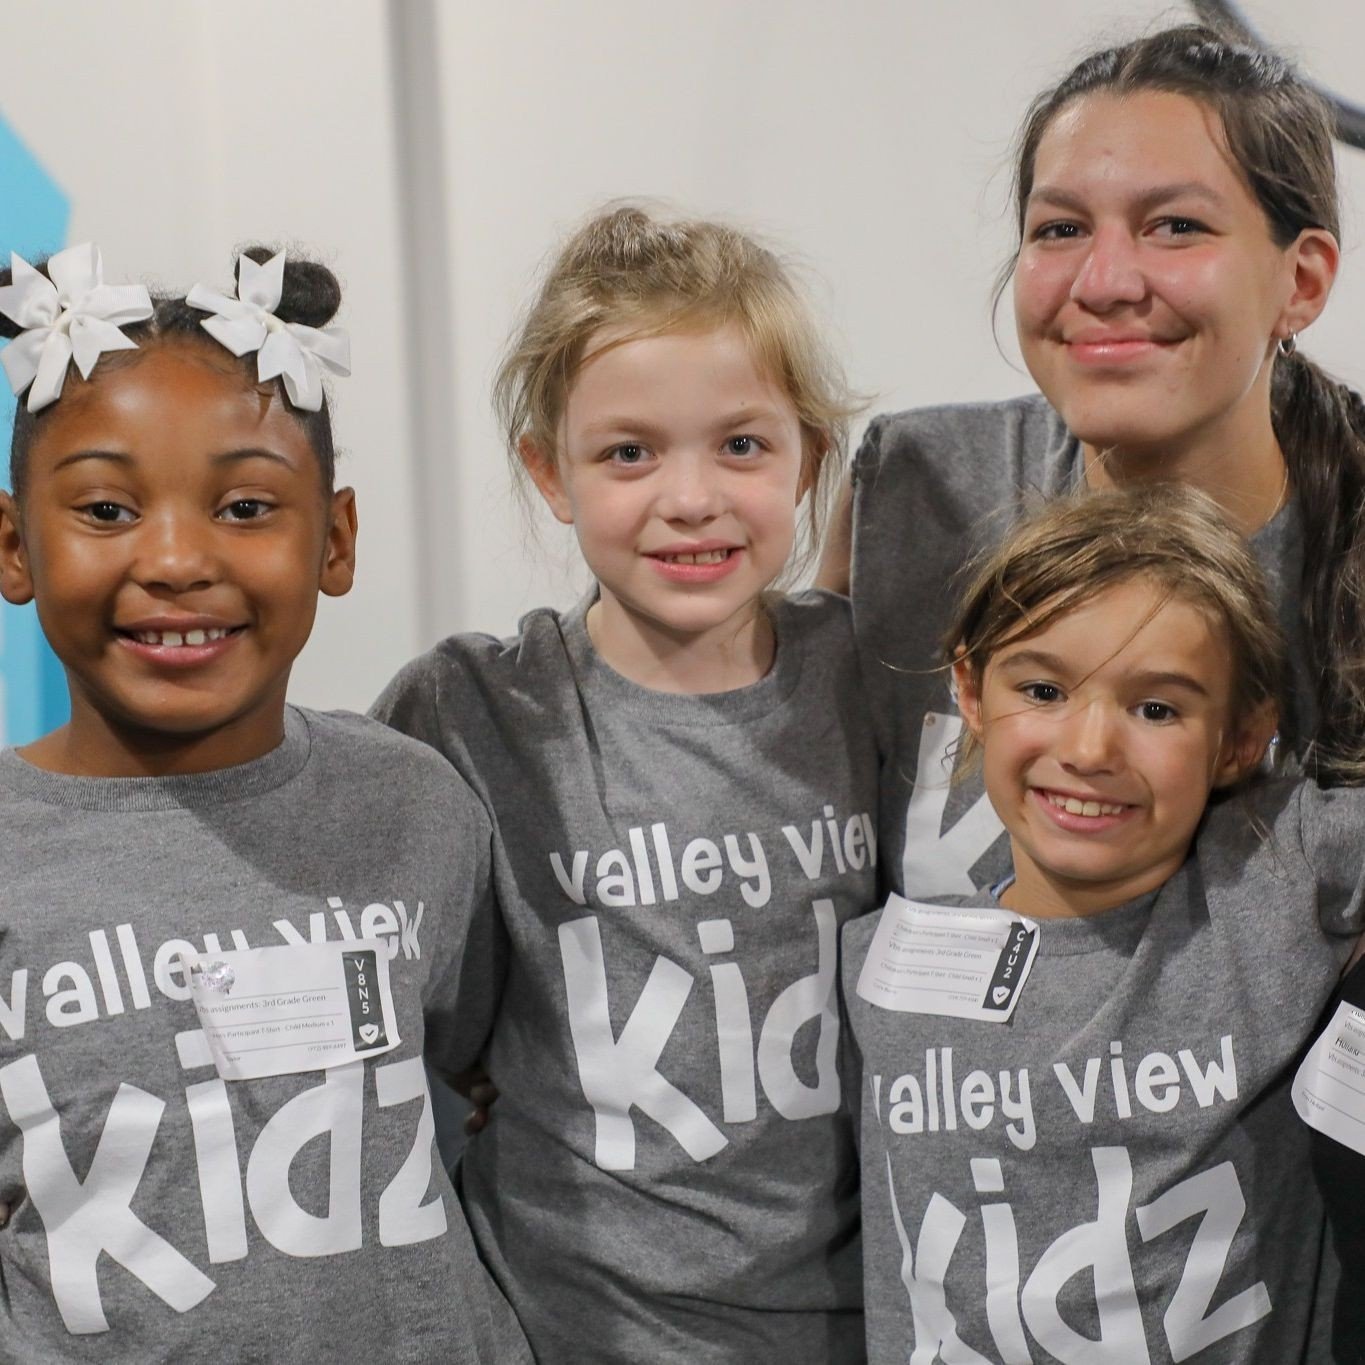 Vacation Bible School is only 15 days away! Your child will learn about the Bible, make friends, and have lots of fun! VBS is for 3 year olds -5th grade. ⁠
To register your child or to volunteer for VBS visit vvcc.org/vbs 🙌🏽⁠
⁠
#valleyviewchristian